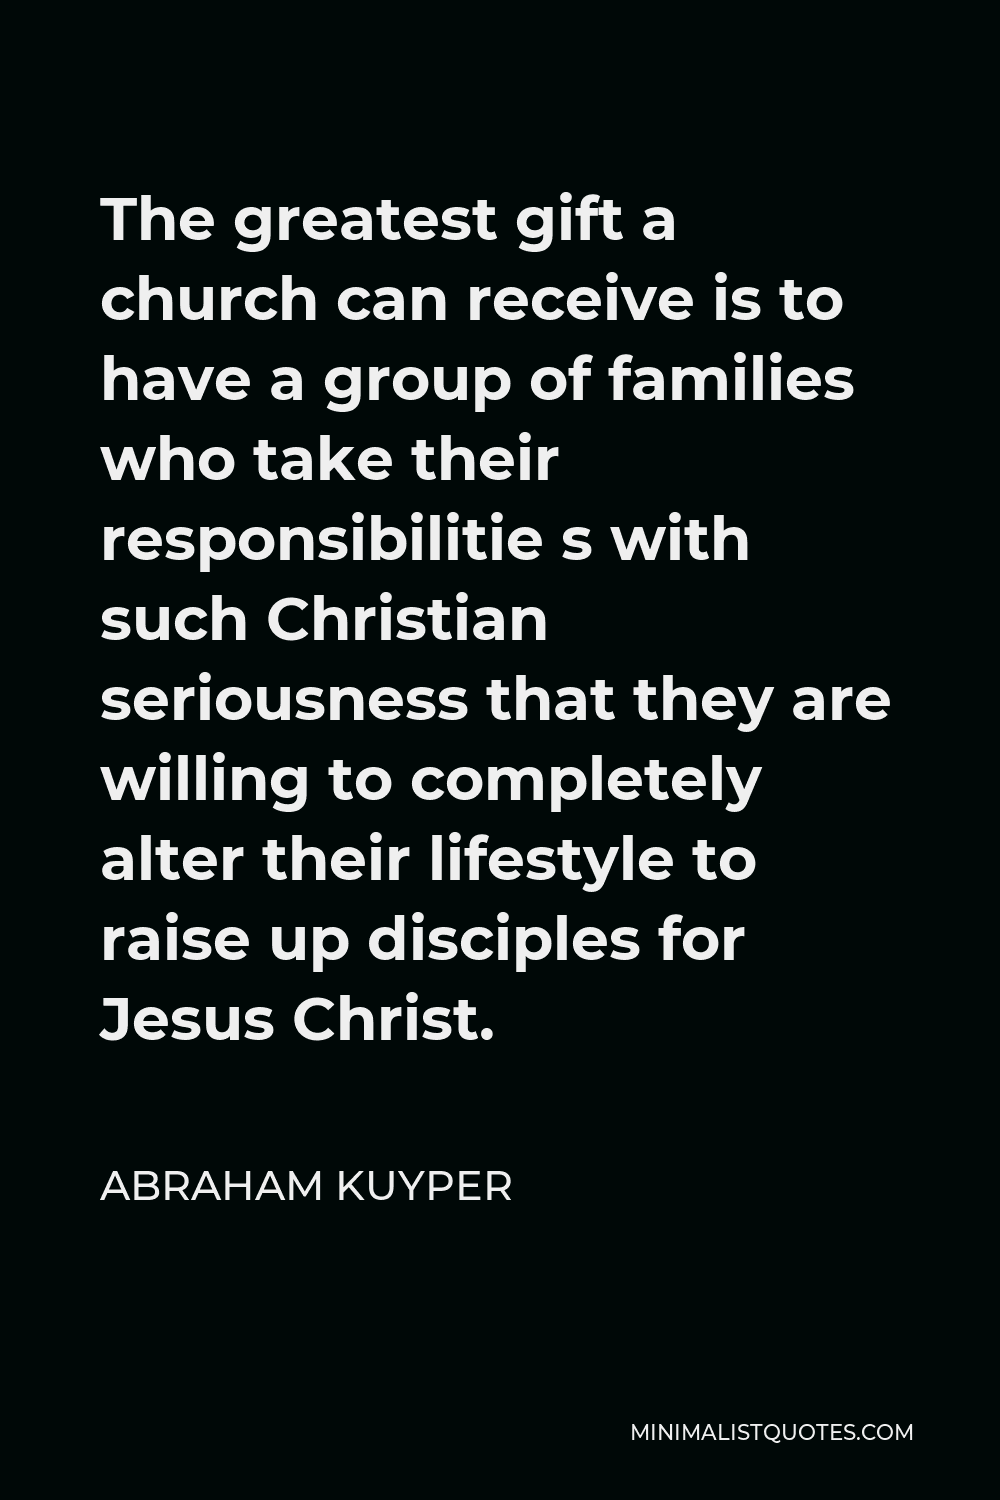 Abraham Kuyper Quote - The greatest gift a church can receive is to have a group of families who take their responsibilitie s with such Christian seriousness that they are willing to completely alter their lifestyle to raise up disciples for Jesus Christ.